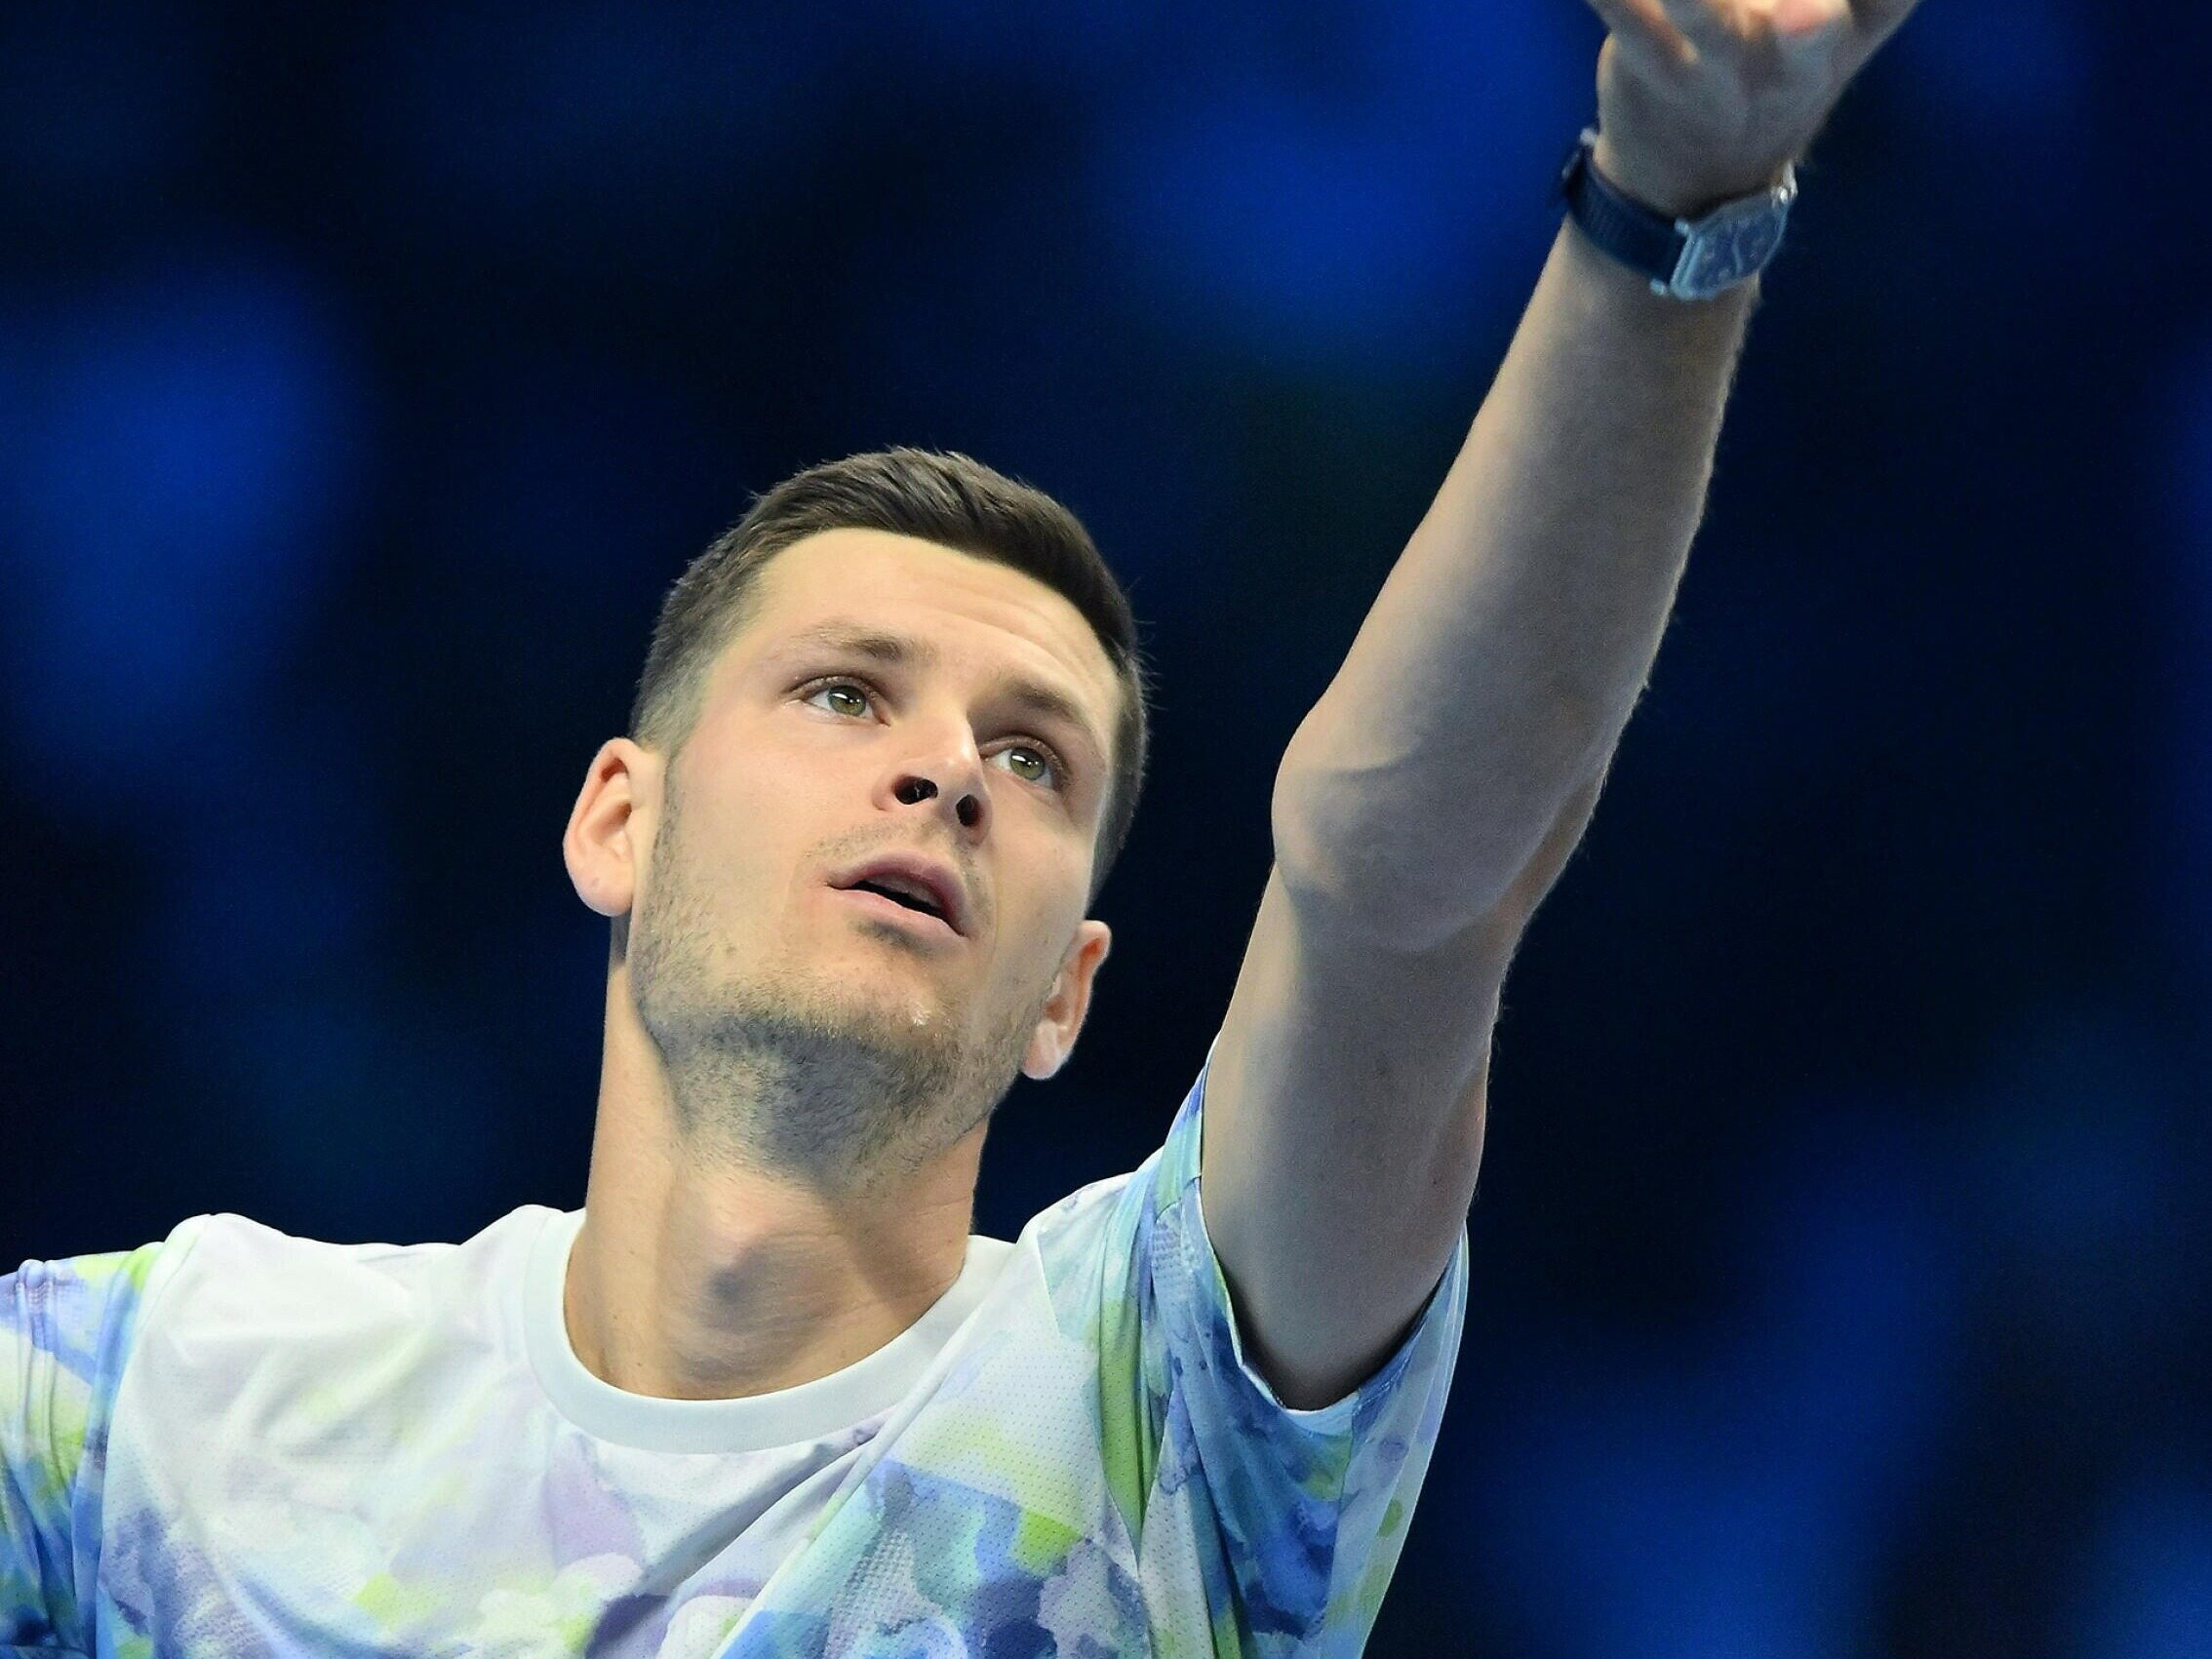 Hubert Hurkacz's eloquent words after his defeat against Novak Djokovic.  This post says it all